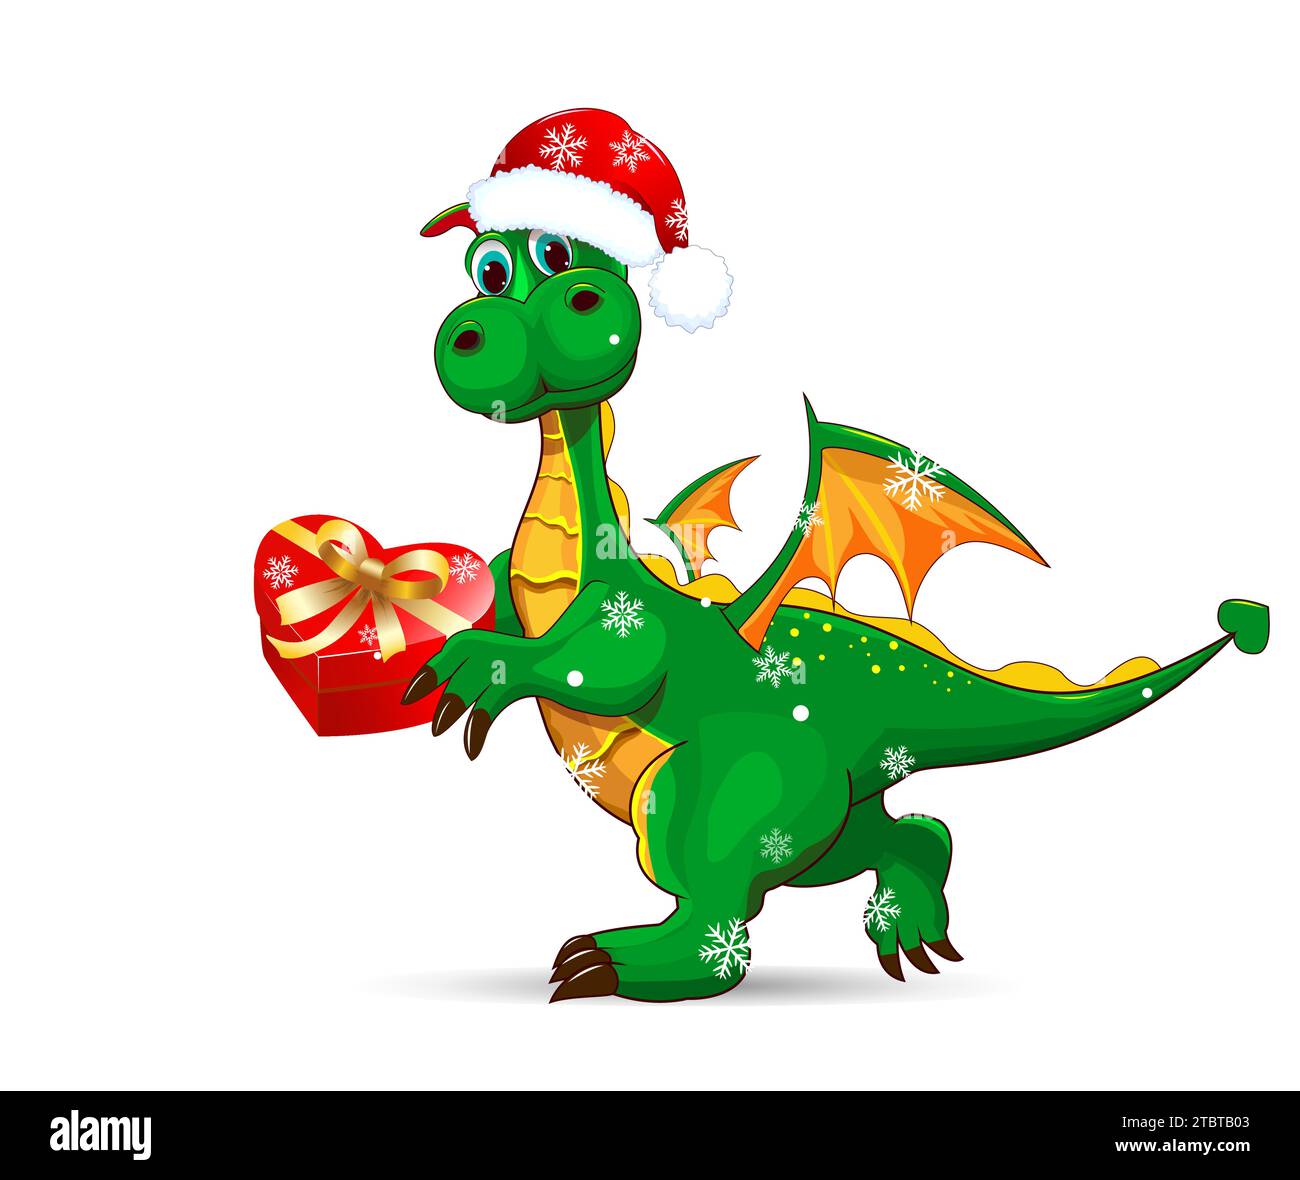 A cartoon green dragon walks wearing a Santa hat, holding a gift box in its paws. A green dino on a white background. Stock Vector